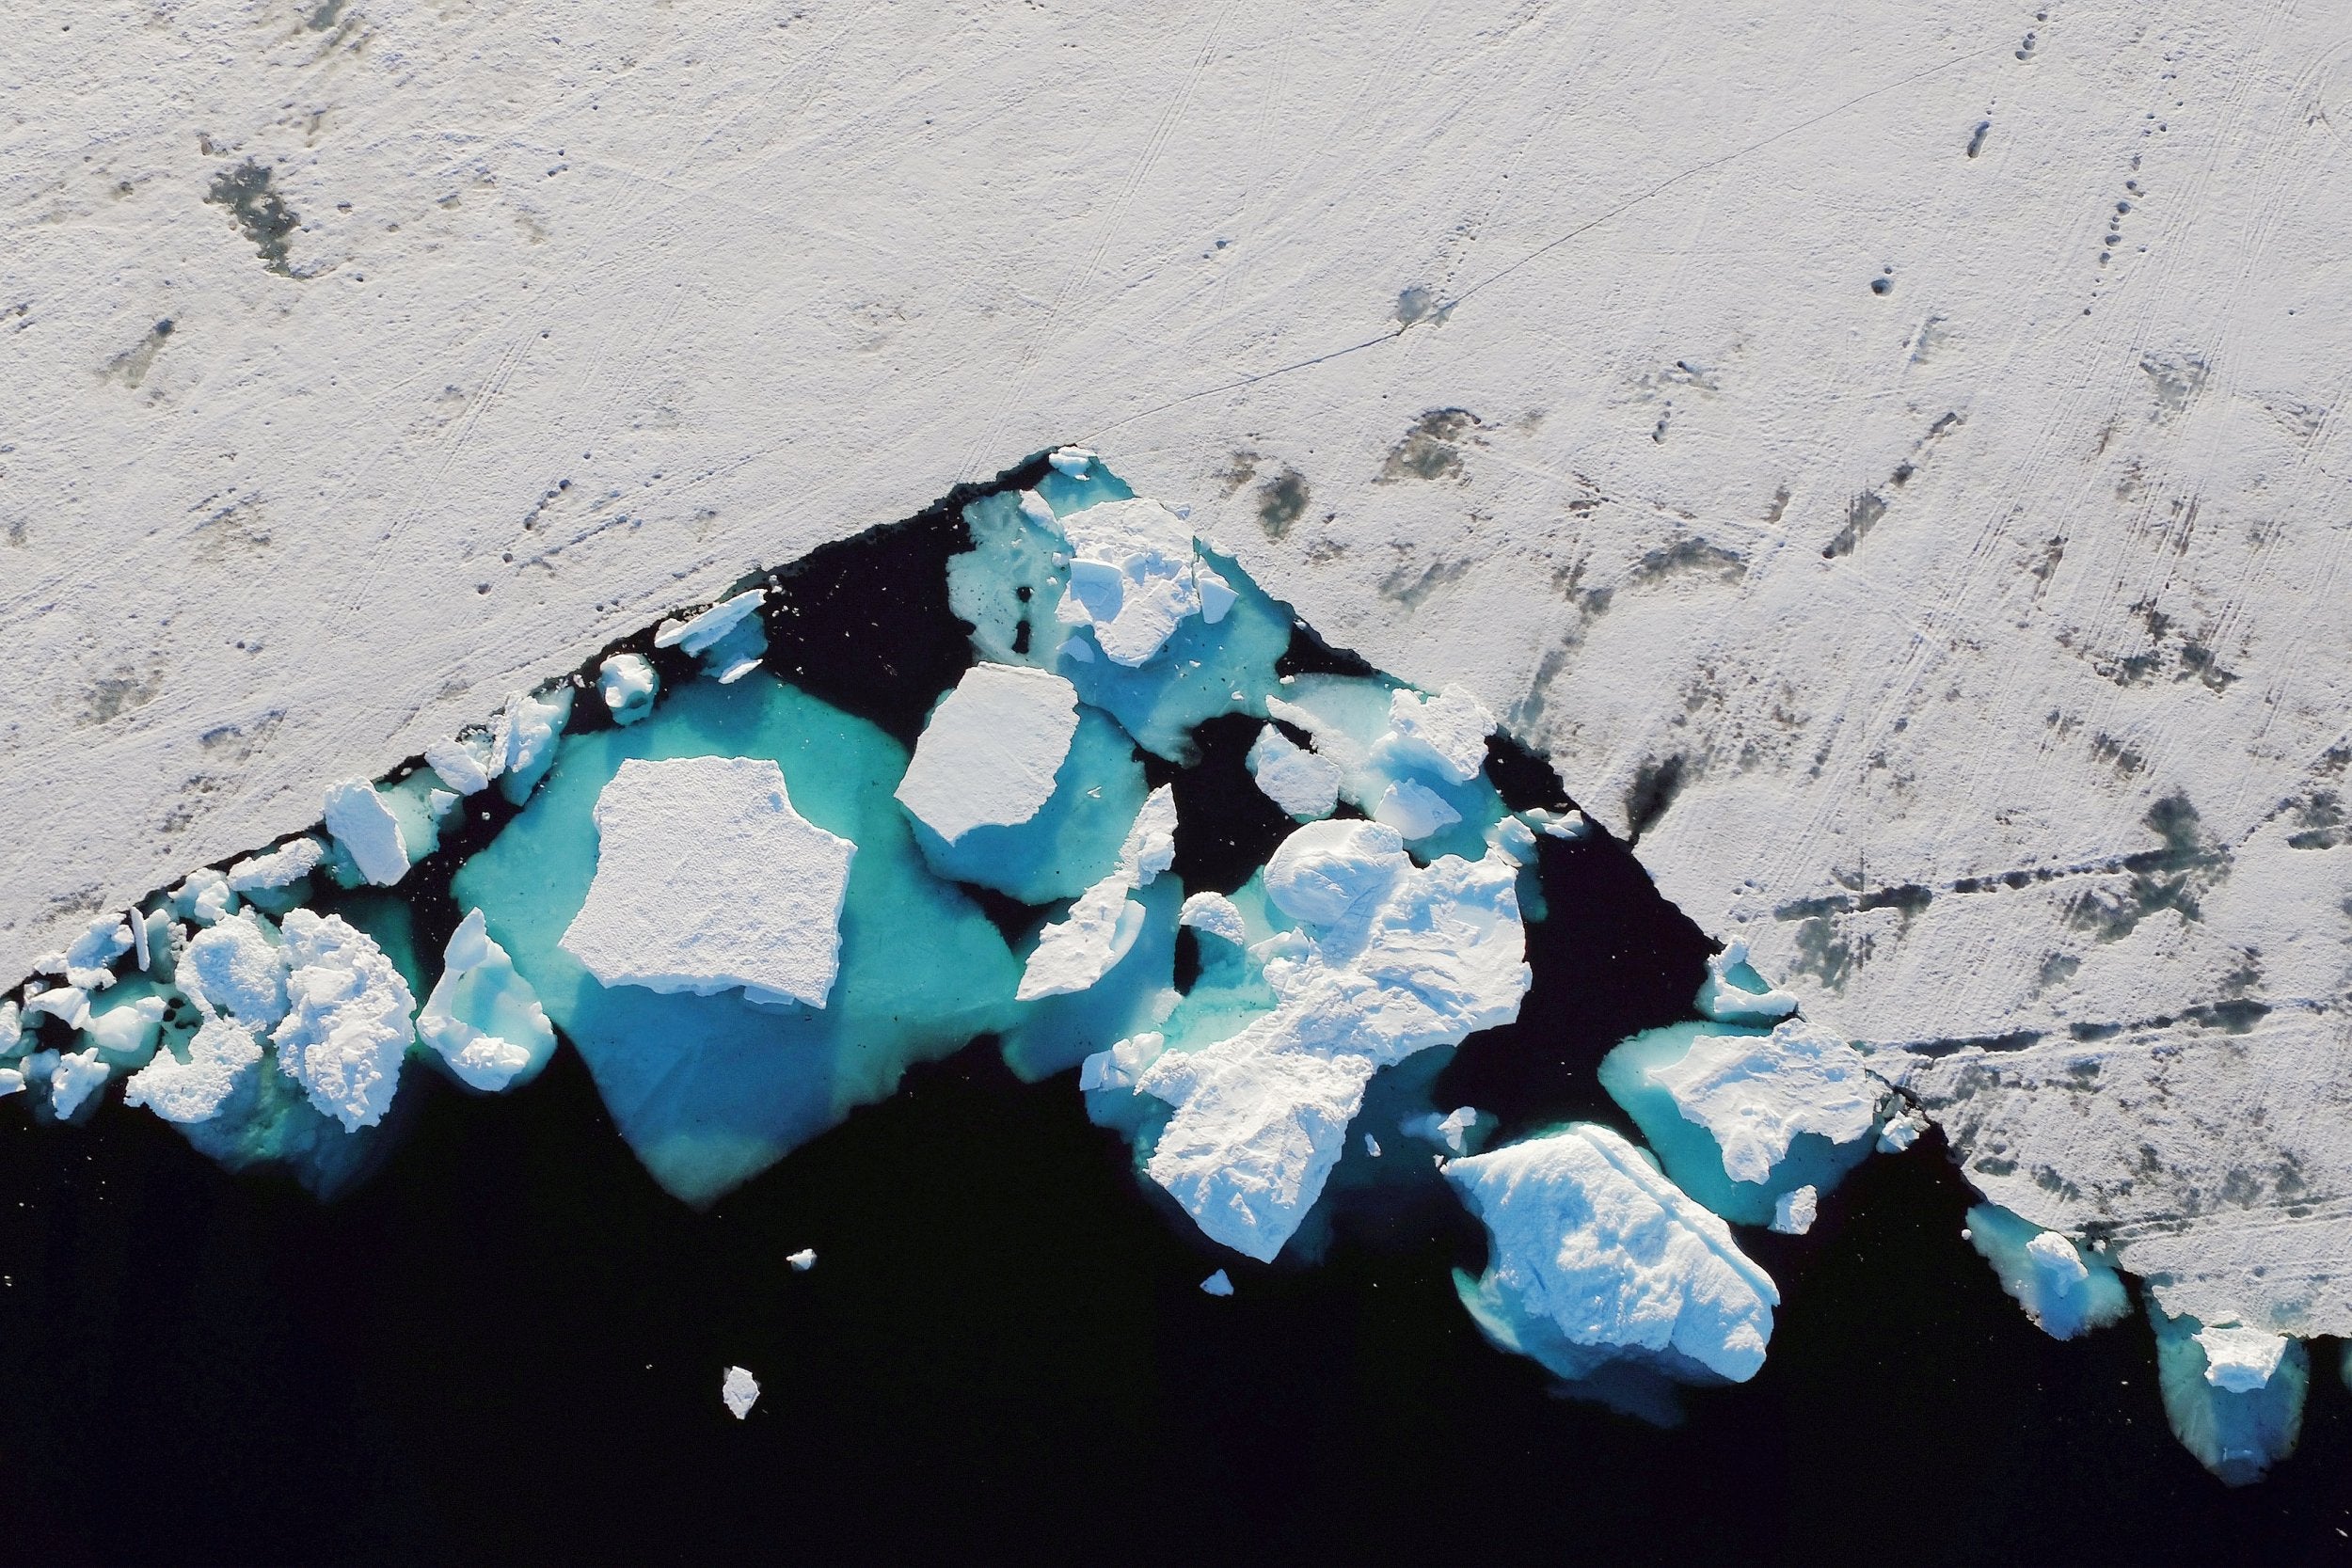 Ice in a fjord in southeastern Greenland last June. A new study shows Greenland lost around 280bn tons of ice per year between 2002 and 2016, enough to raise the worldwide sea level by 0.03 inches every year